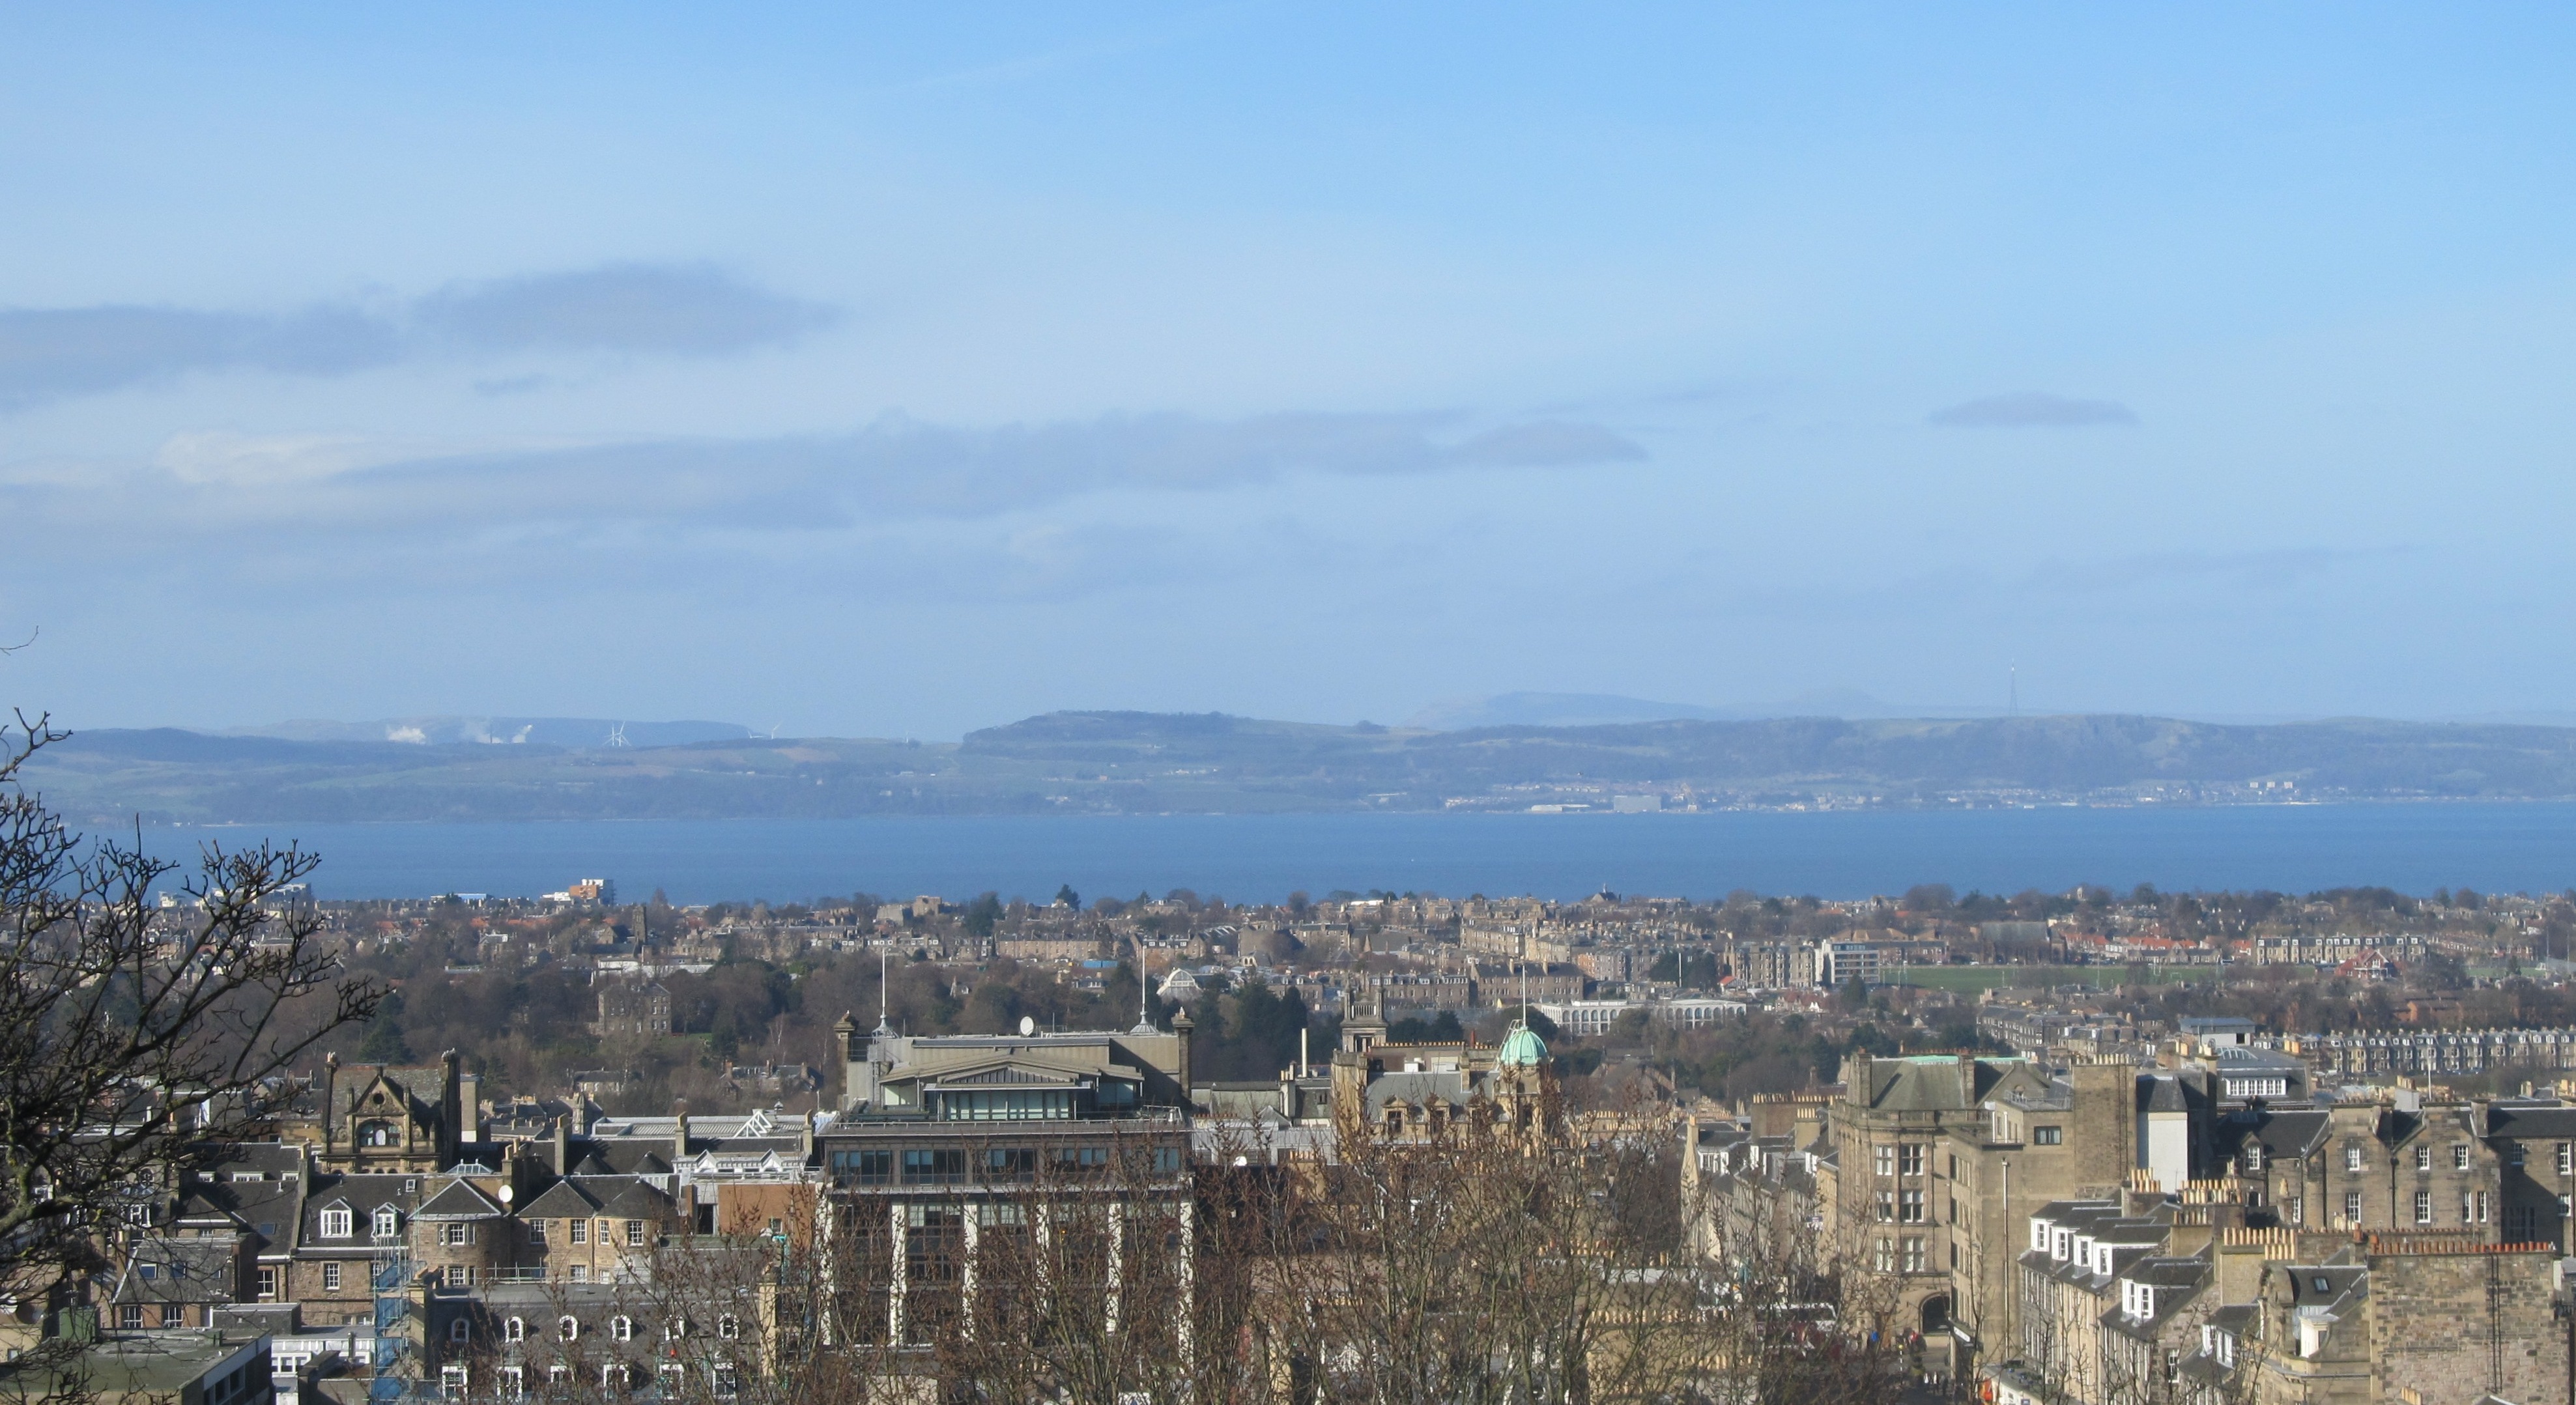 Firth of Forth seen from Edinburgh Castle forecourt